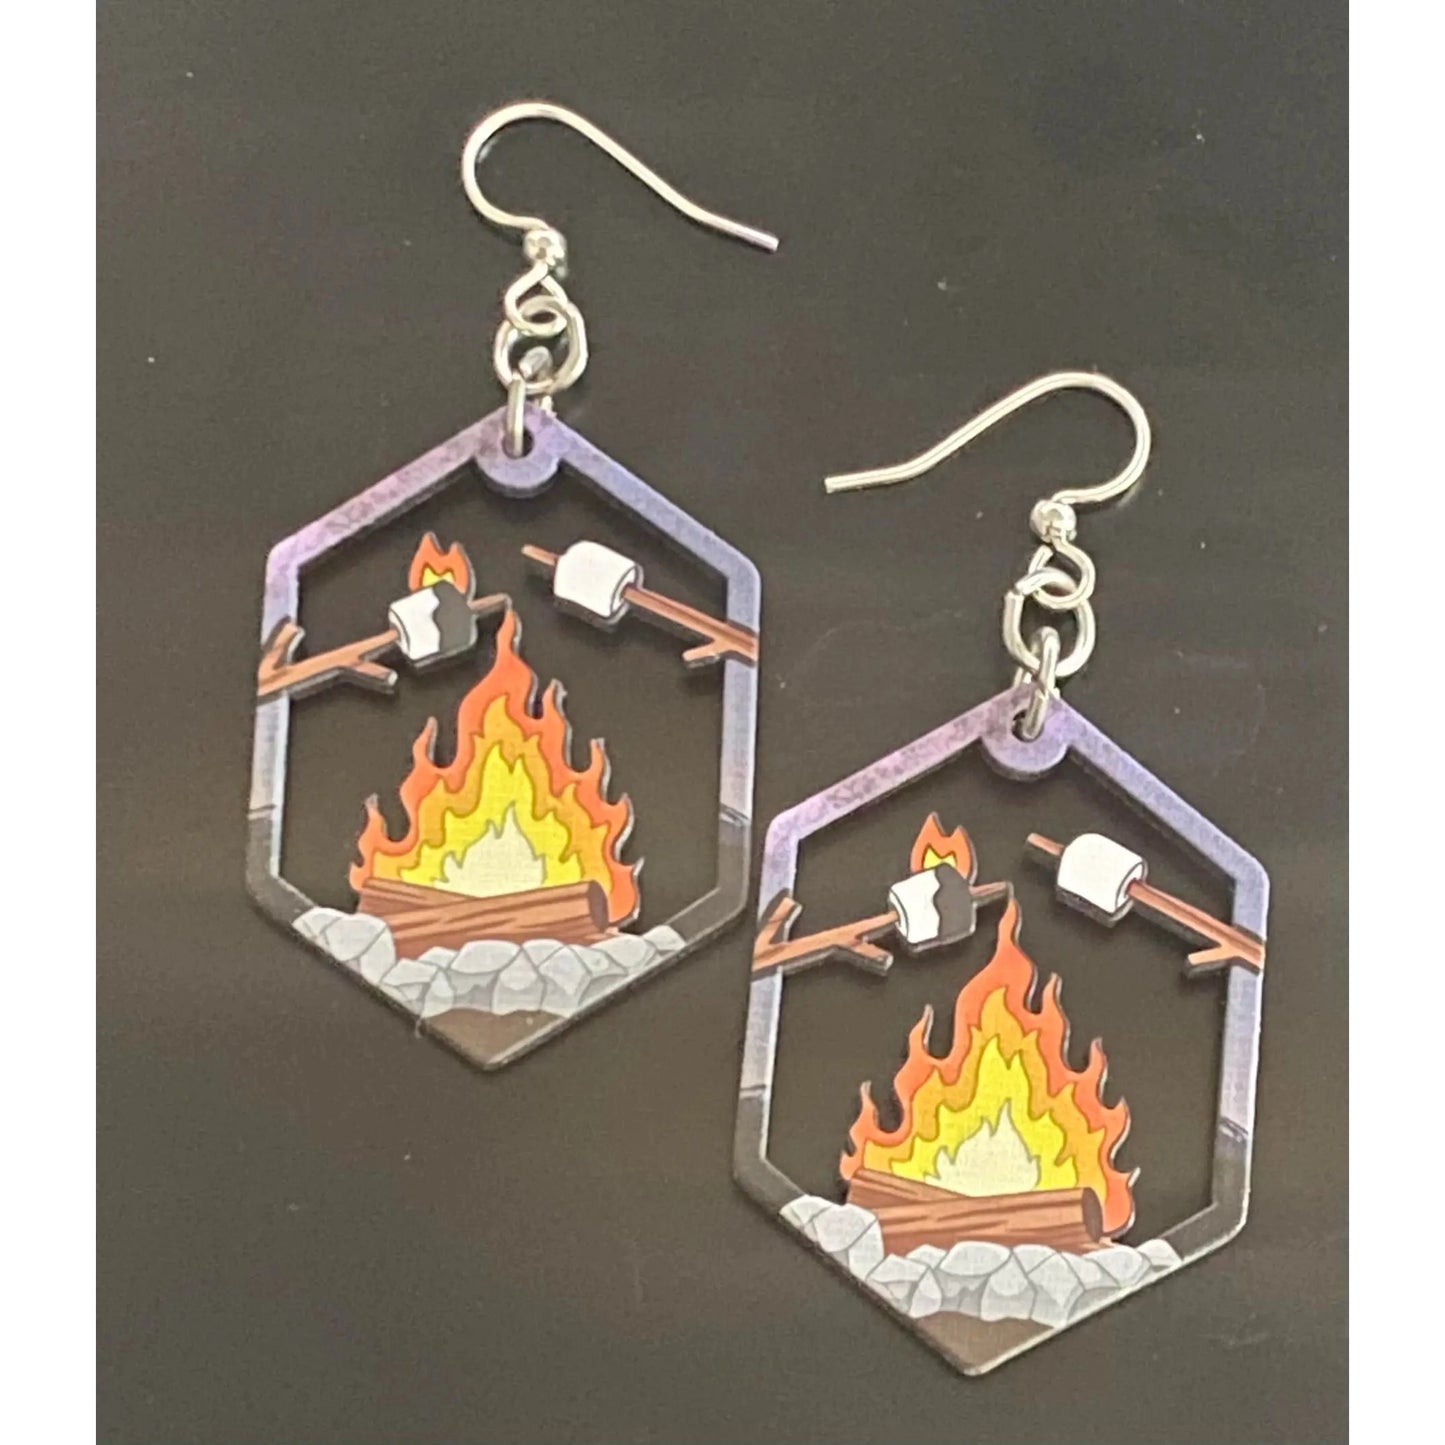 S'mores And Campfire Hook Earrings | 1" x 1.4" Laser Cut Wood Earrings | Handmade in USA